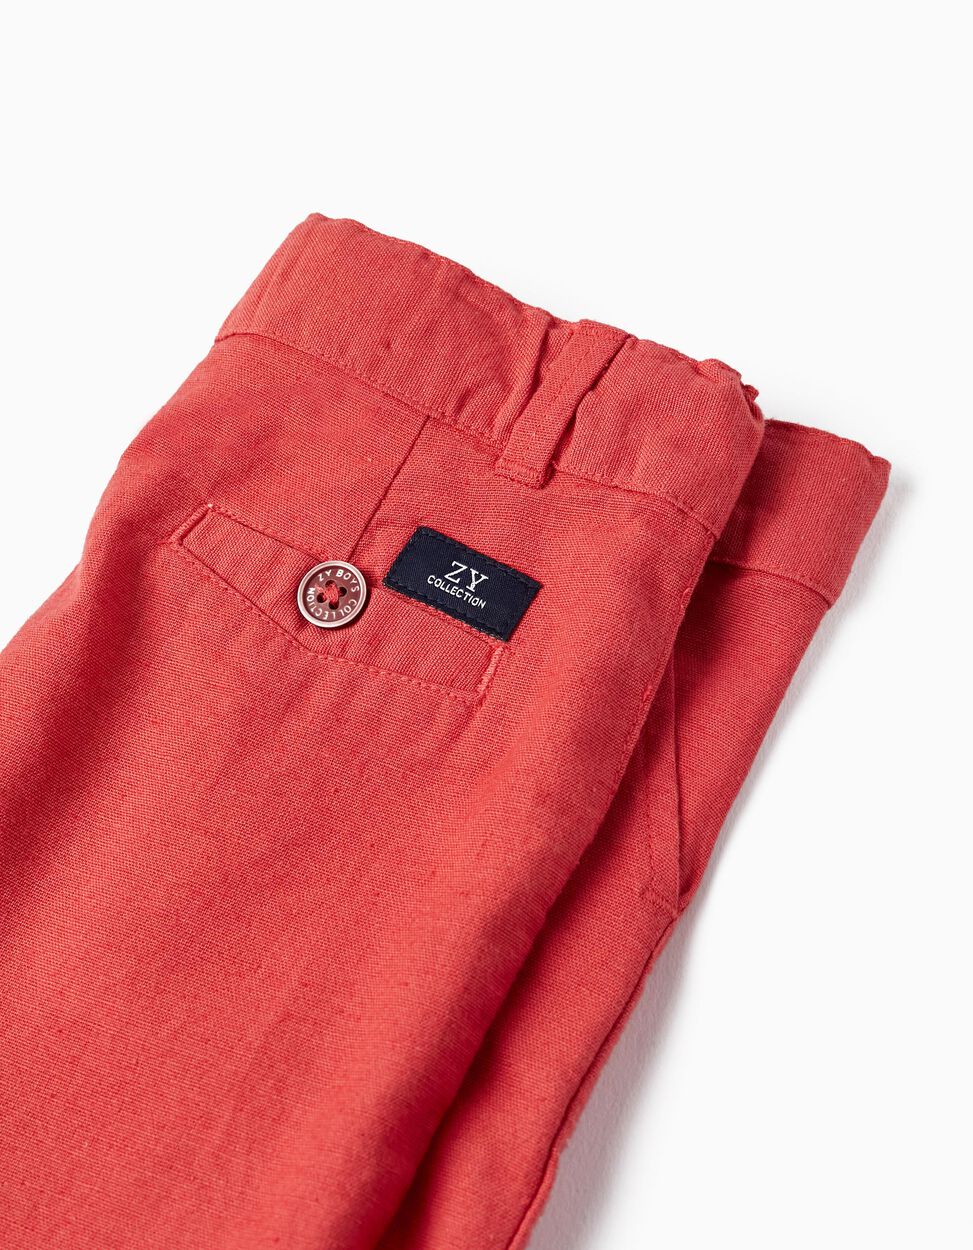 Buy Online Chino Shorts for Baby Boy, Red